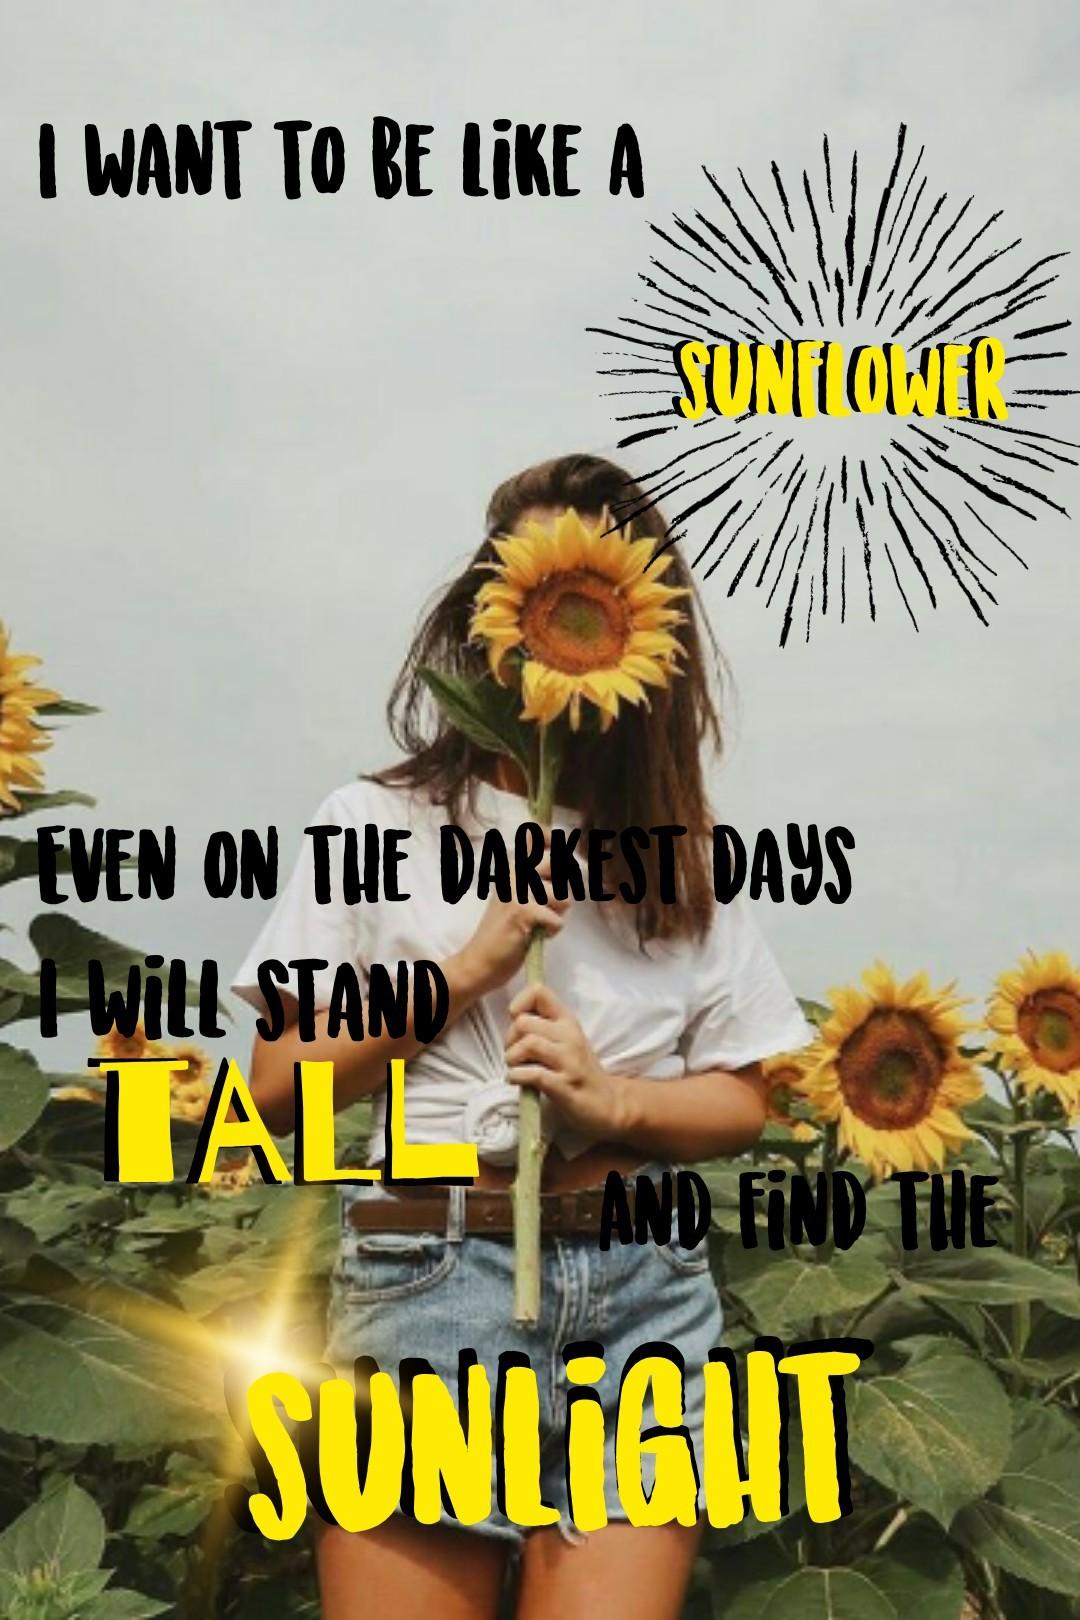 🌻Tap🌻
I hope y'all like this collage! Stand tall like a sunflower would!